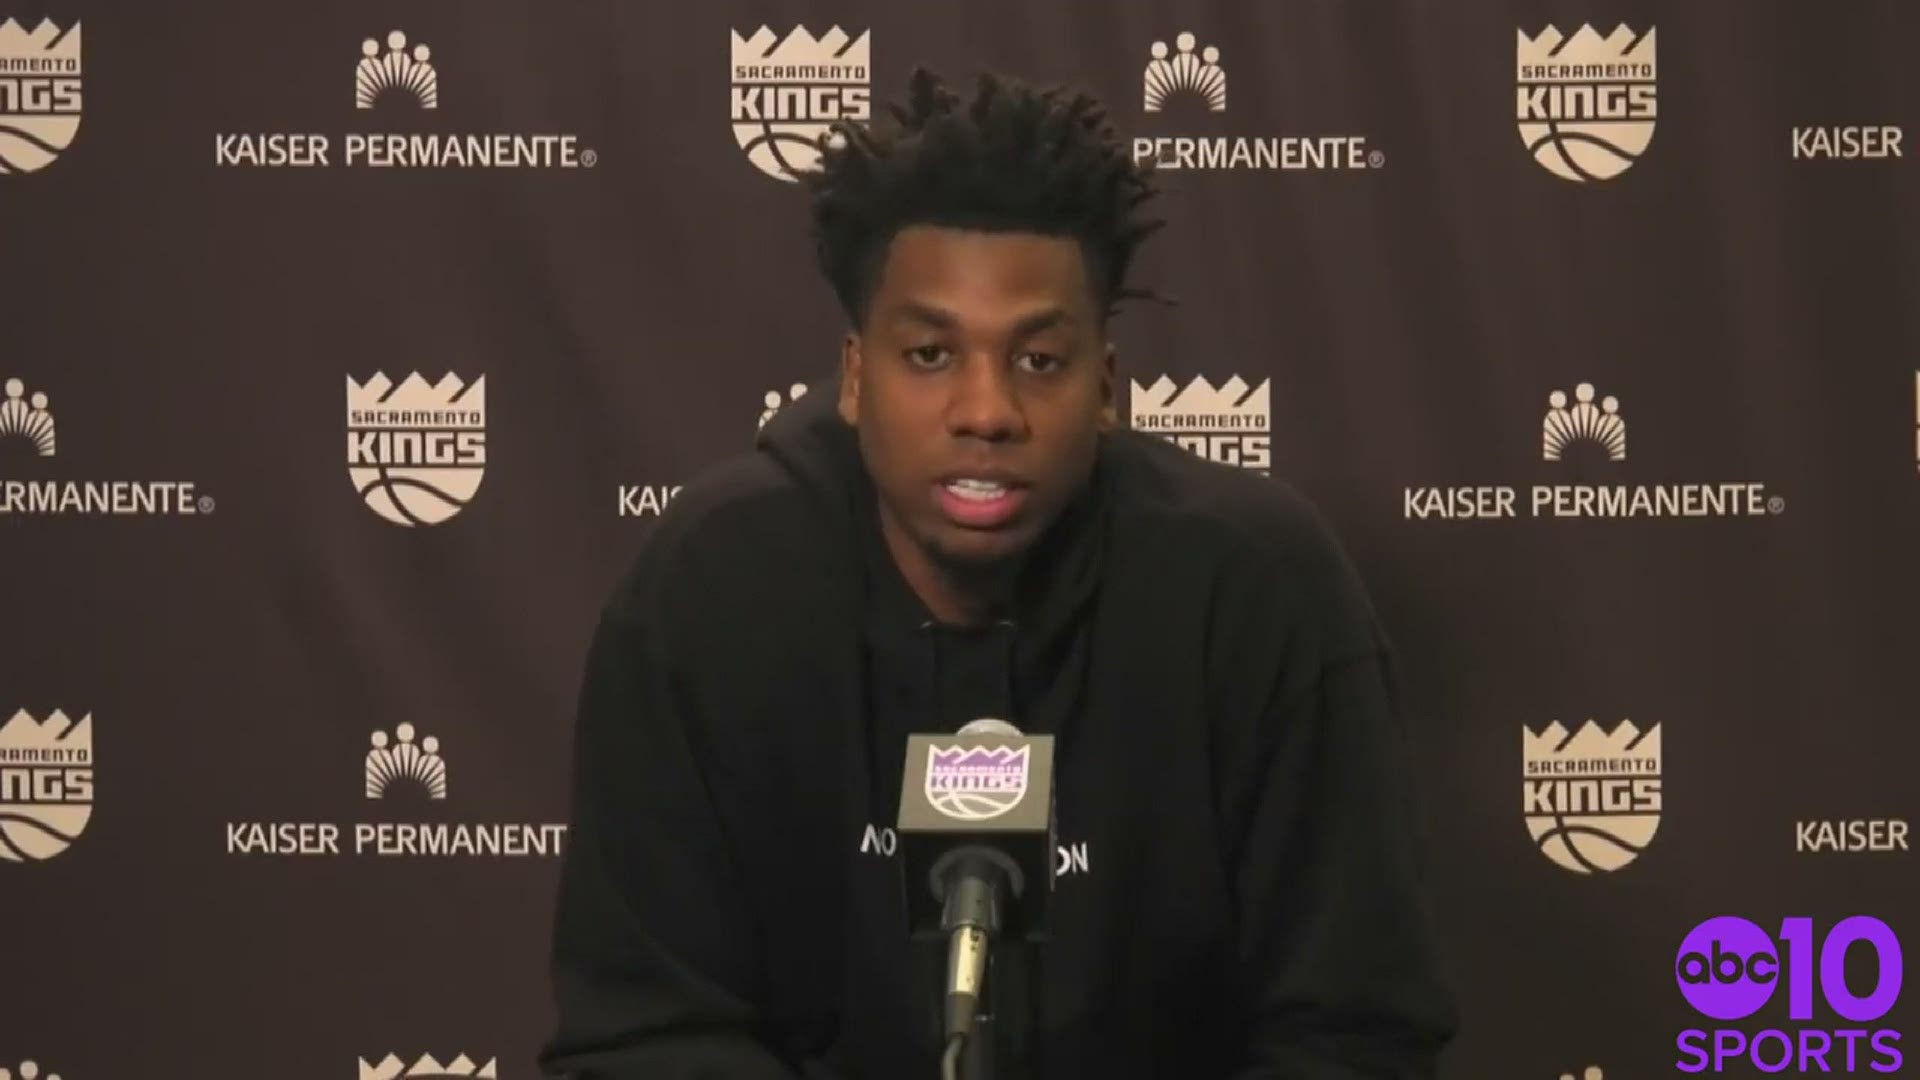 Hassan Whiteside, who was originally drafted by Sacramento back in 2010, discusses his decision to rejoin the Kings as a free agent.